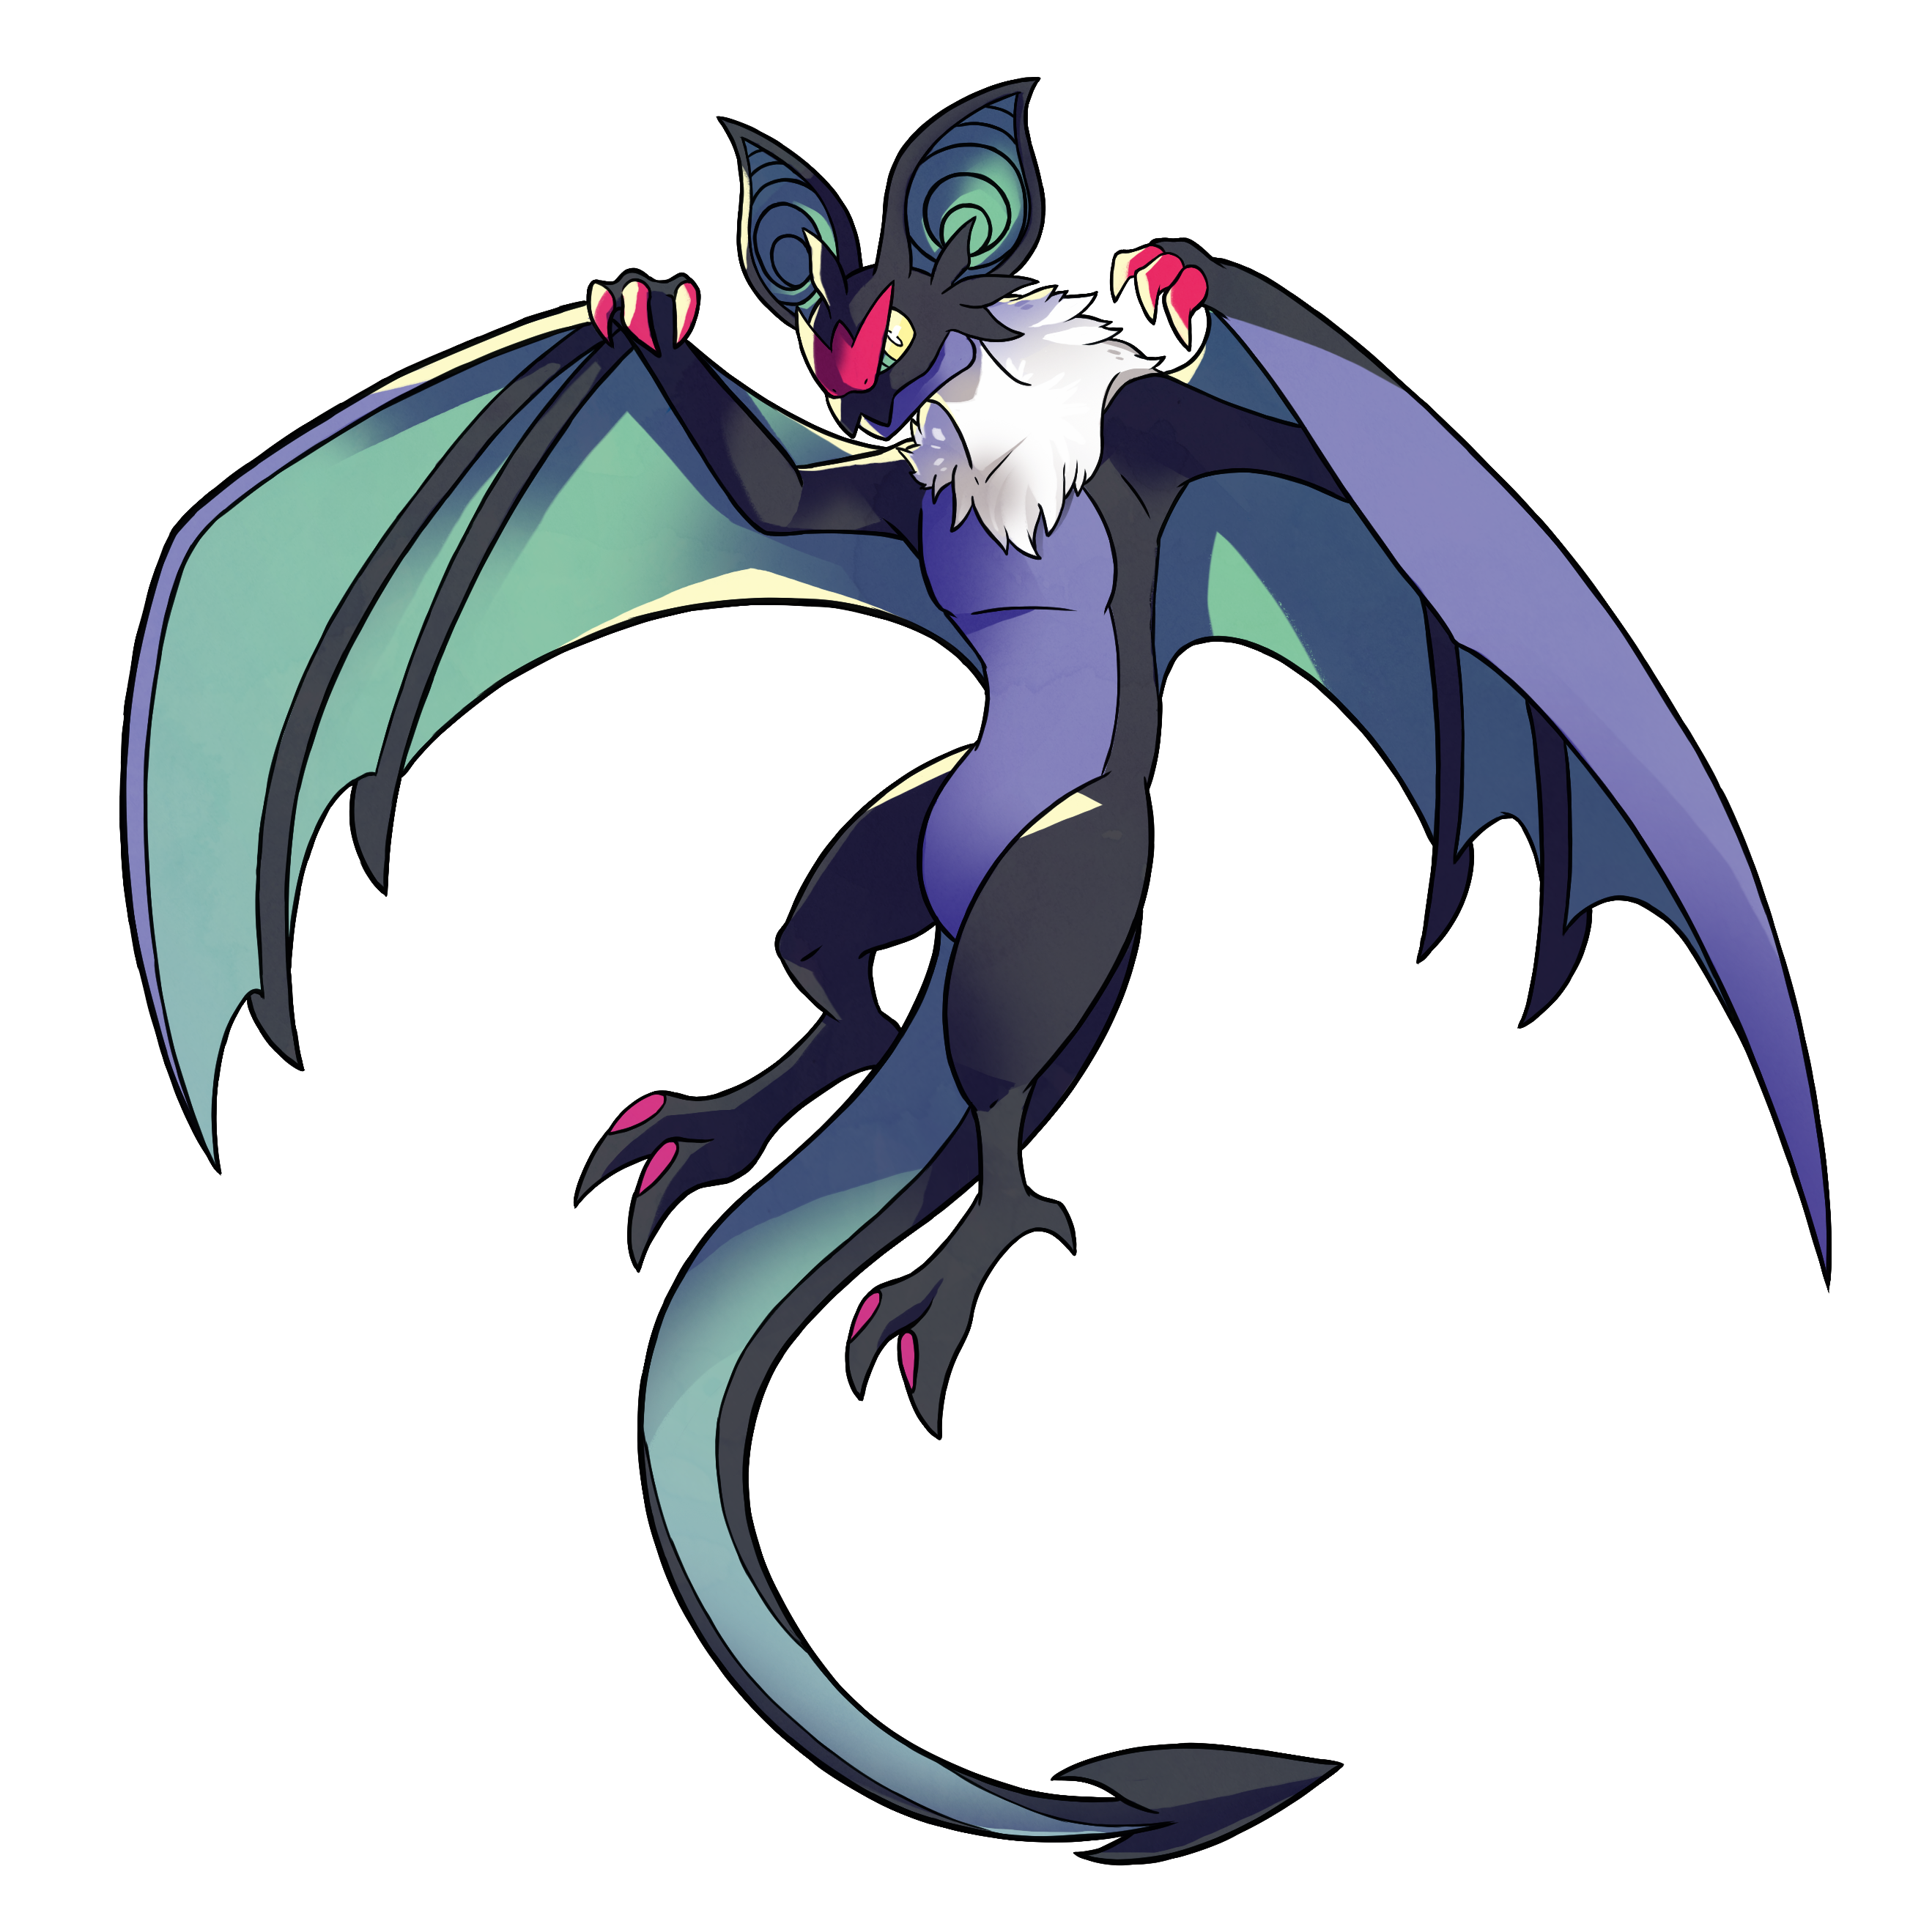 noivern3.png